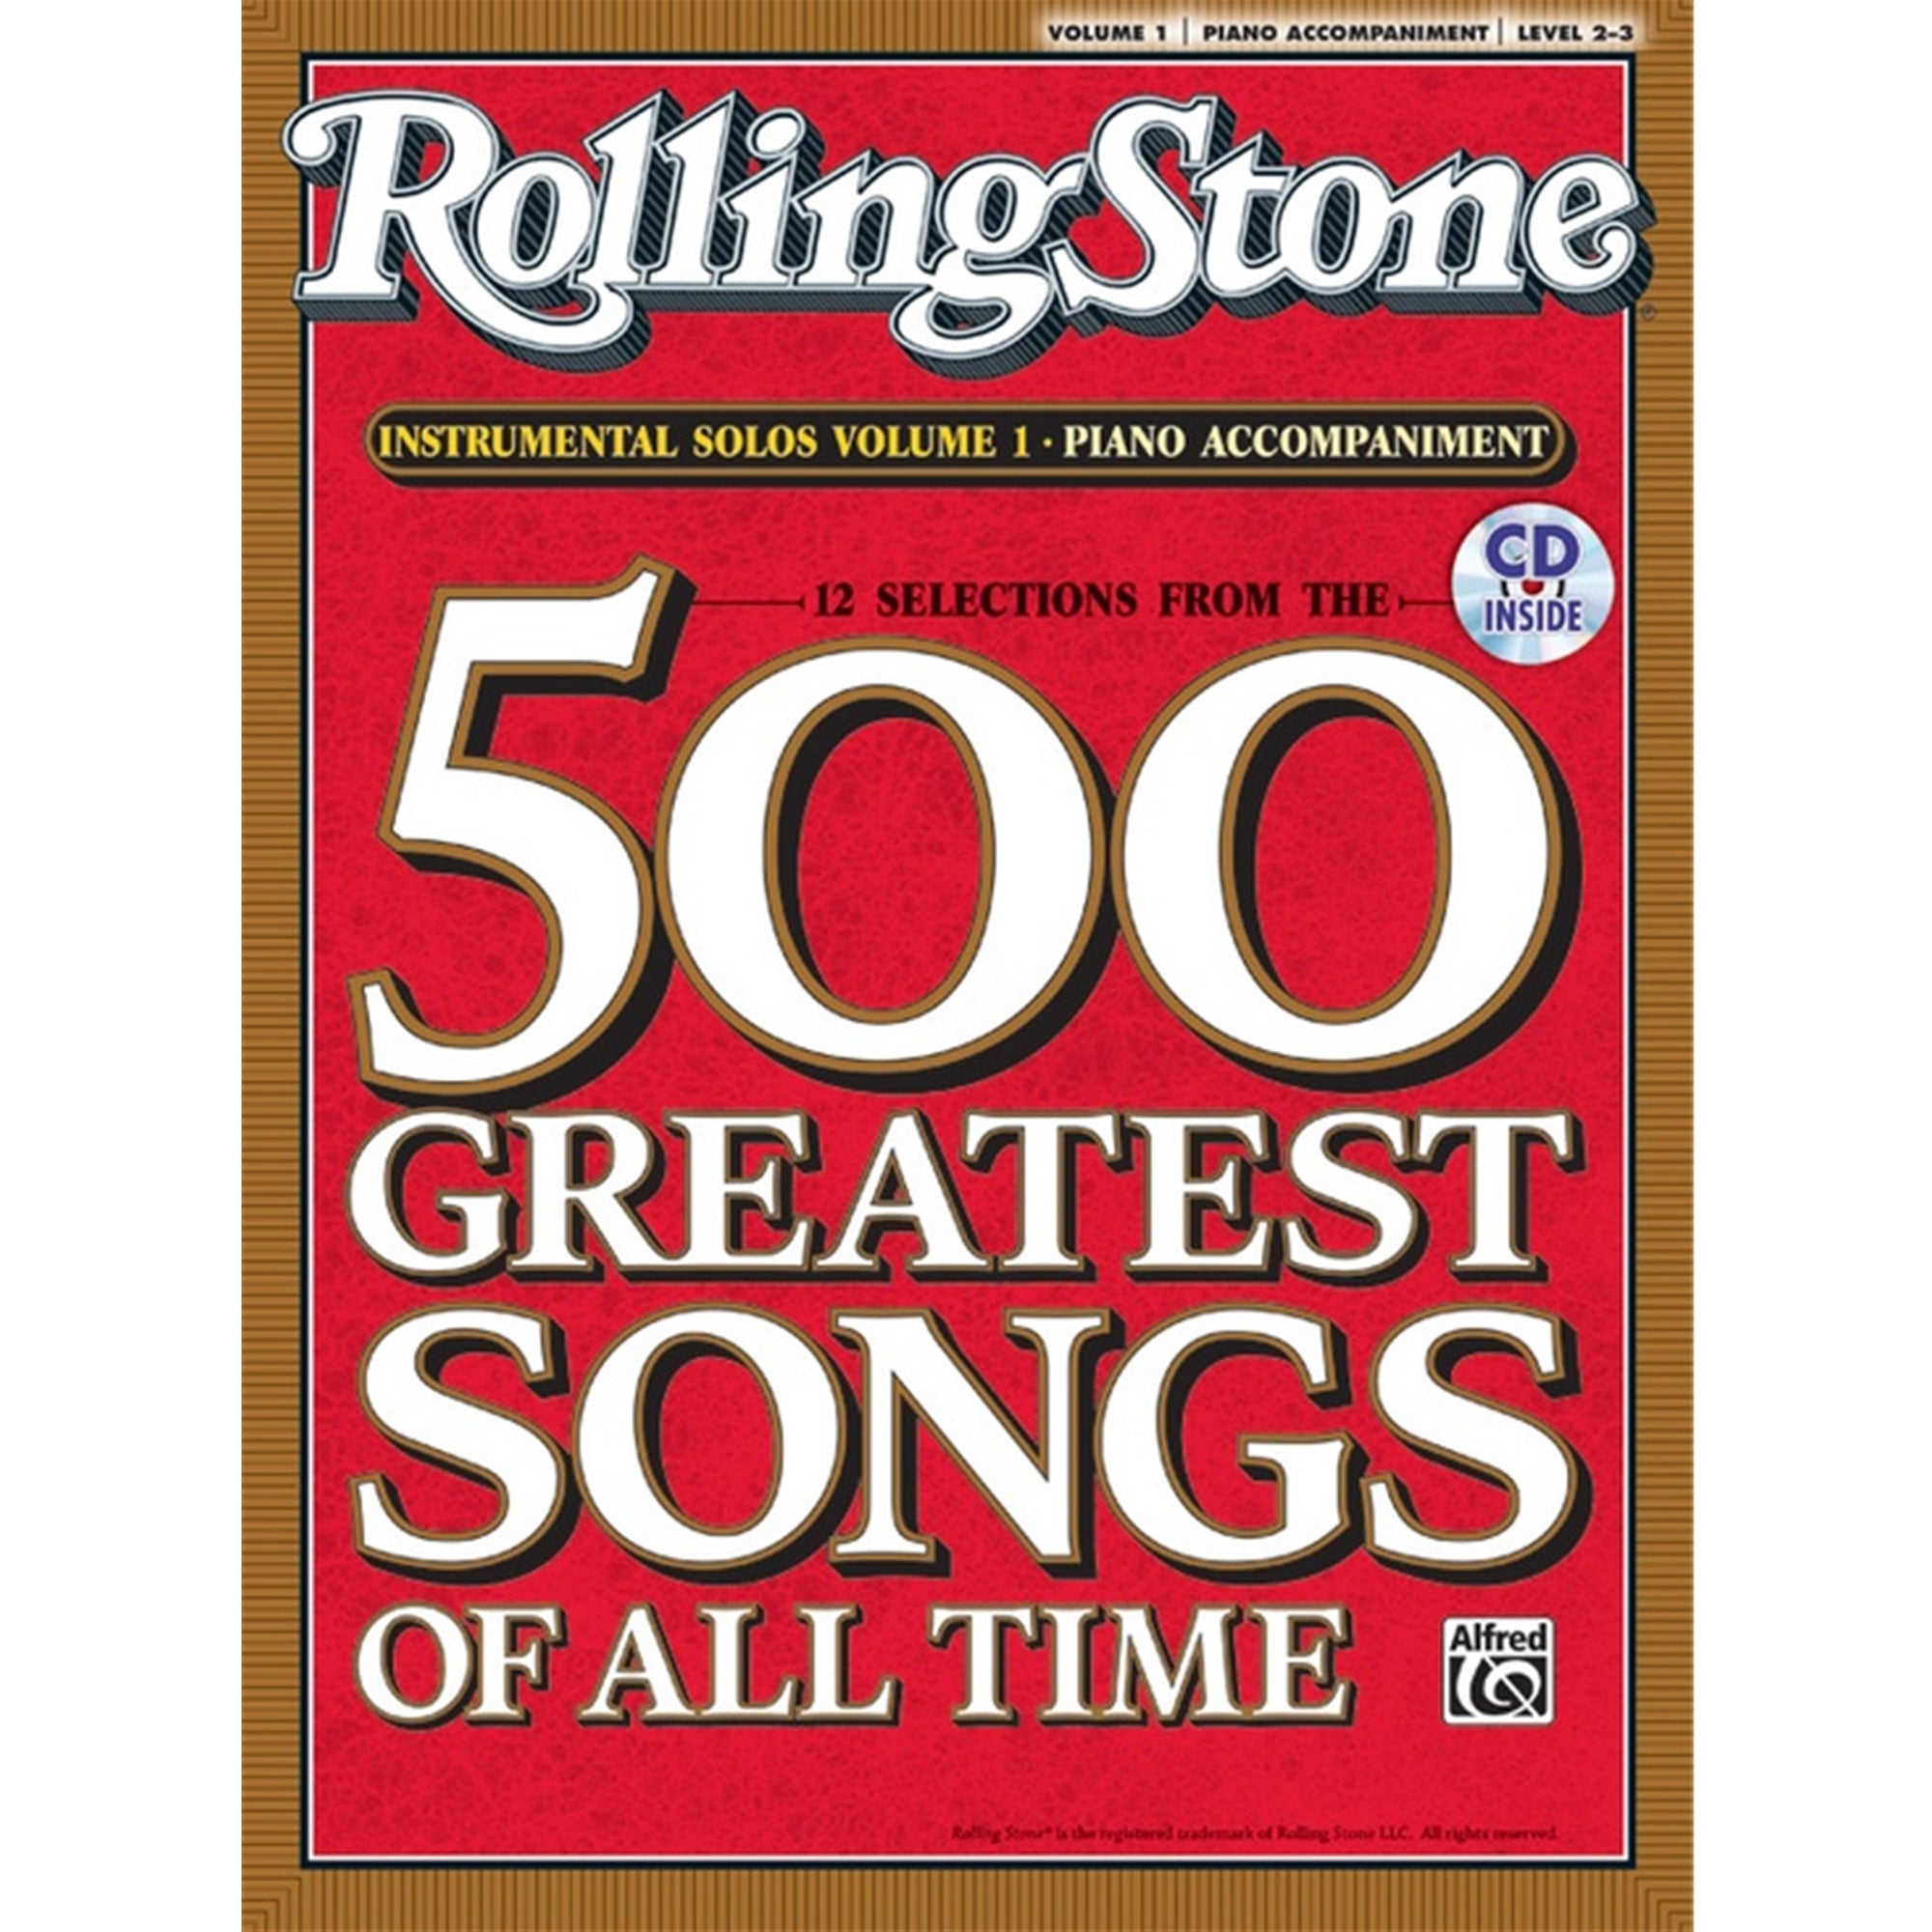 ALFRED 30356 Selections from Rolling Stone Magazine's 500 Greatest Songs of All Time: Instrumental Solos, Volume